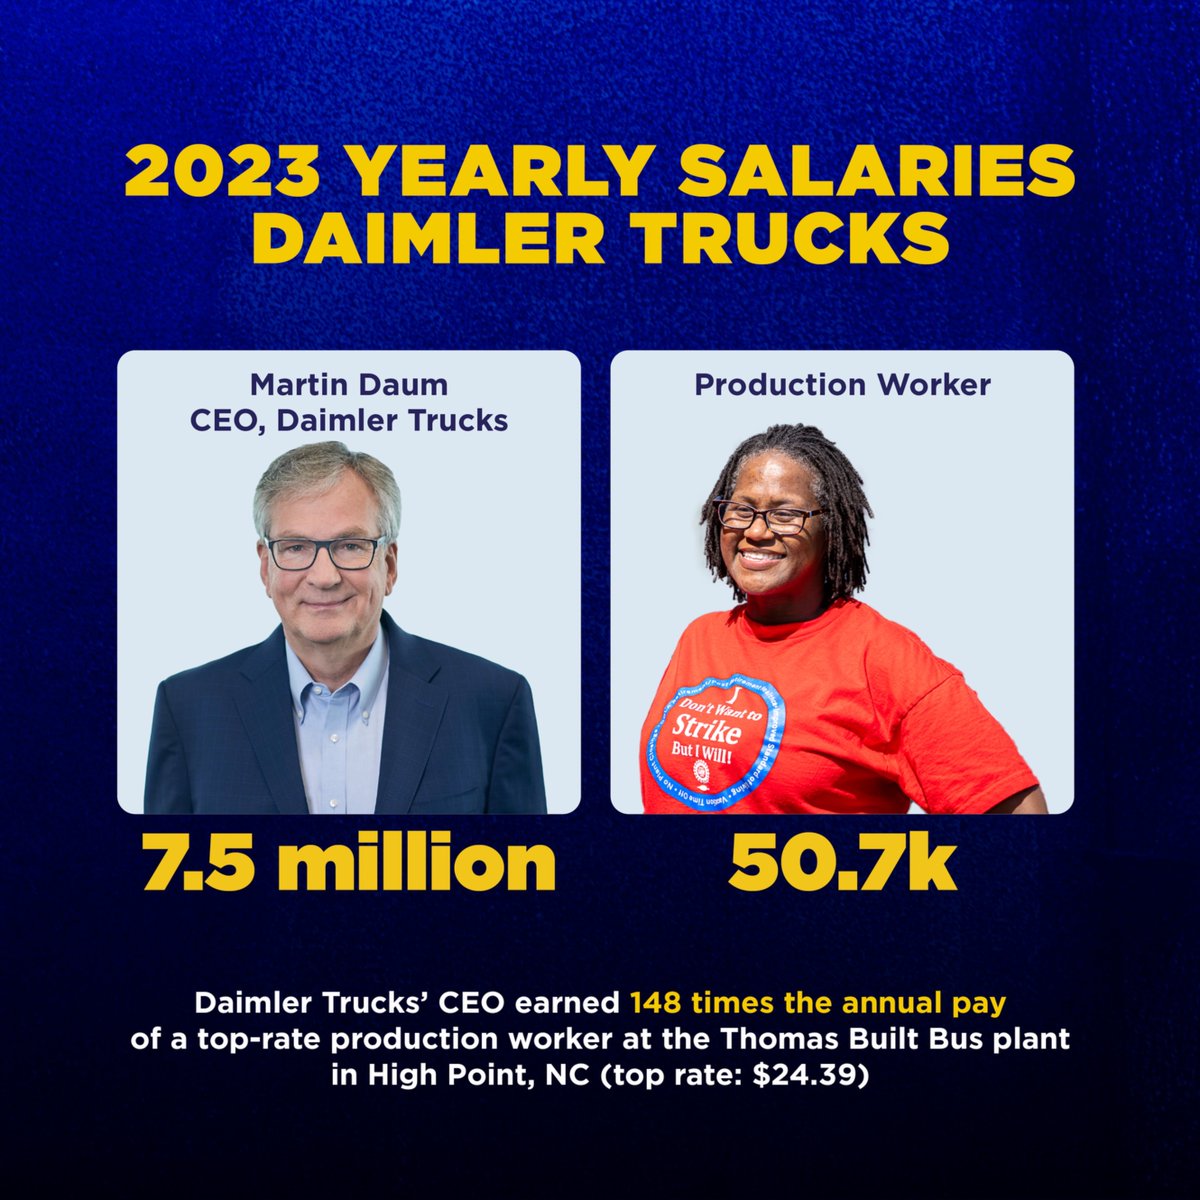 Daimler Trucks' CEO earned $7.5 million in 2023, 148 times the annual pay of a top-rate production worker at the Thomas Built Bus plant in High Point, NC (top rate: $24.39).
Record profits mean record contracts. Tick-tock Daimler! ⏰⏰⏰
#StandUpDaimler #StandUpUAW